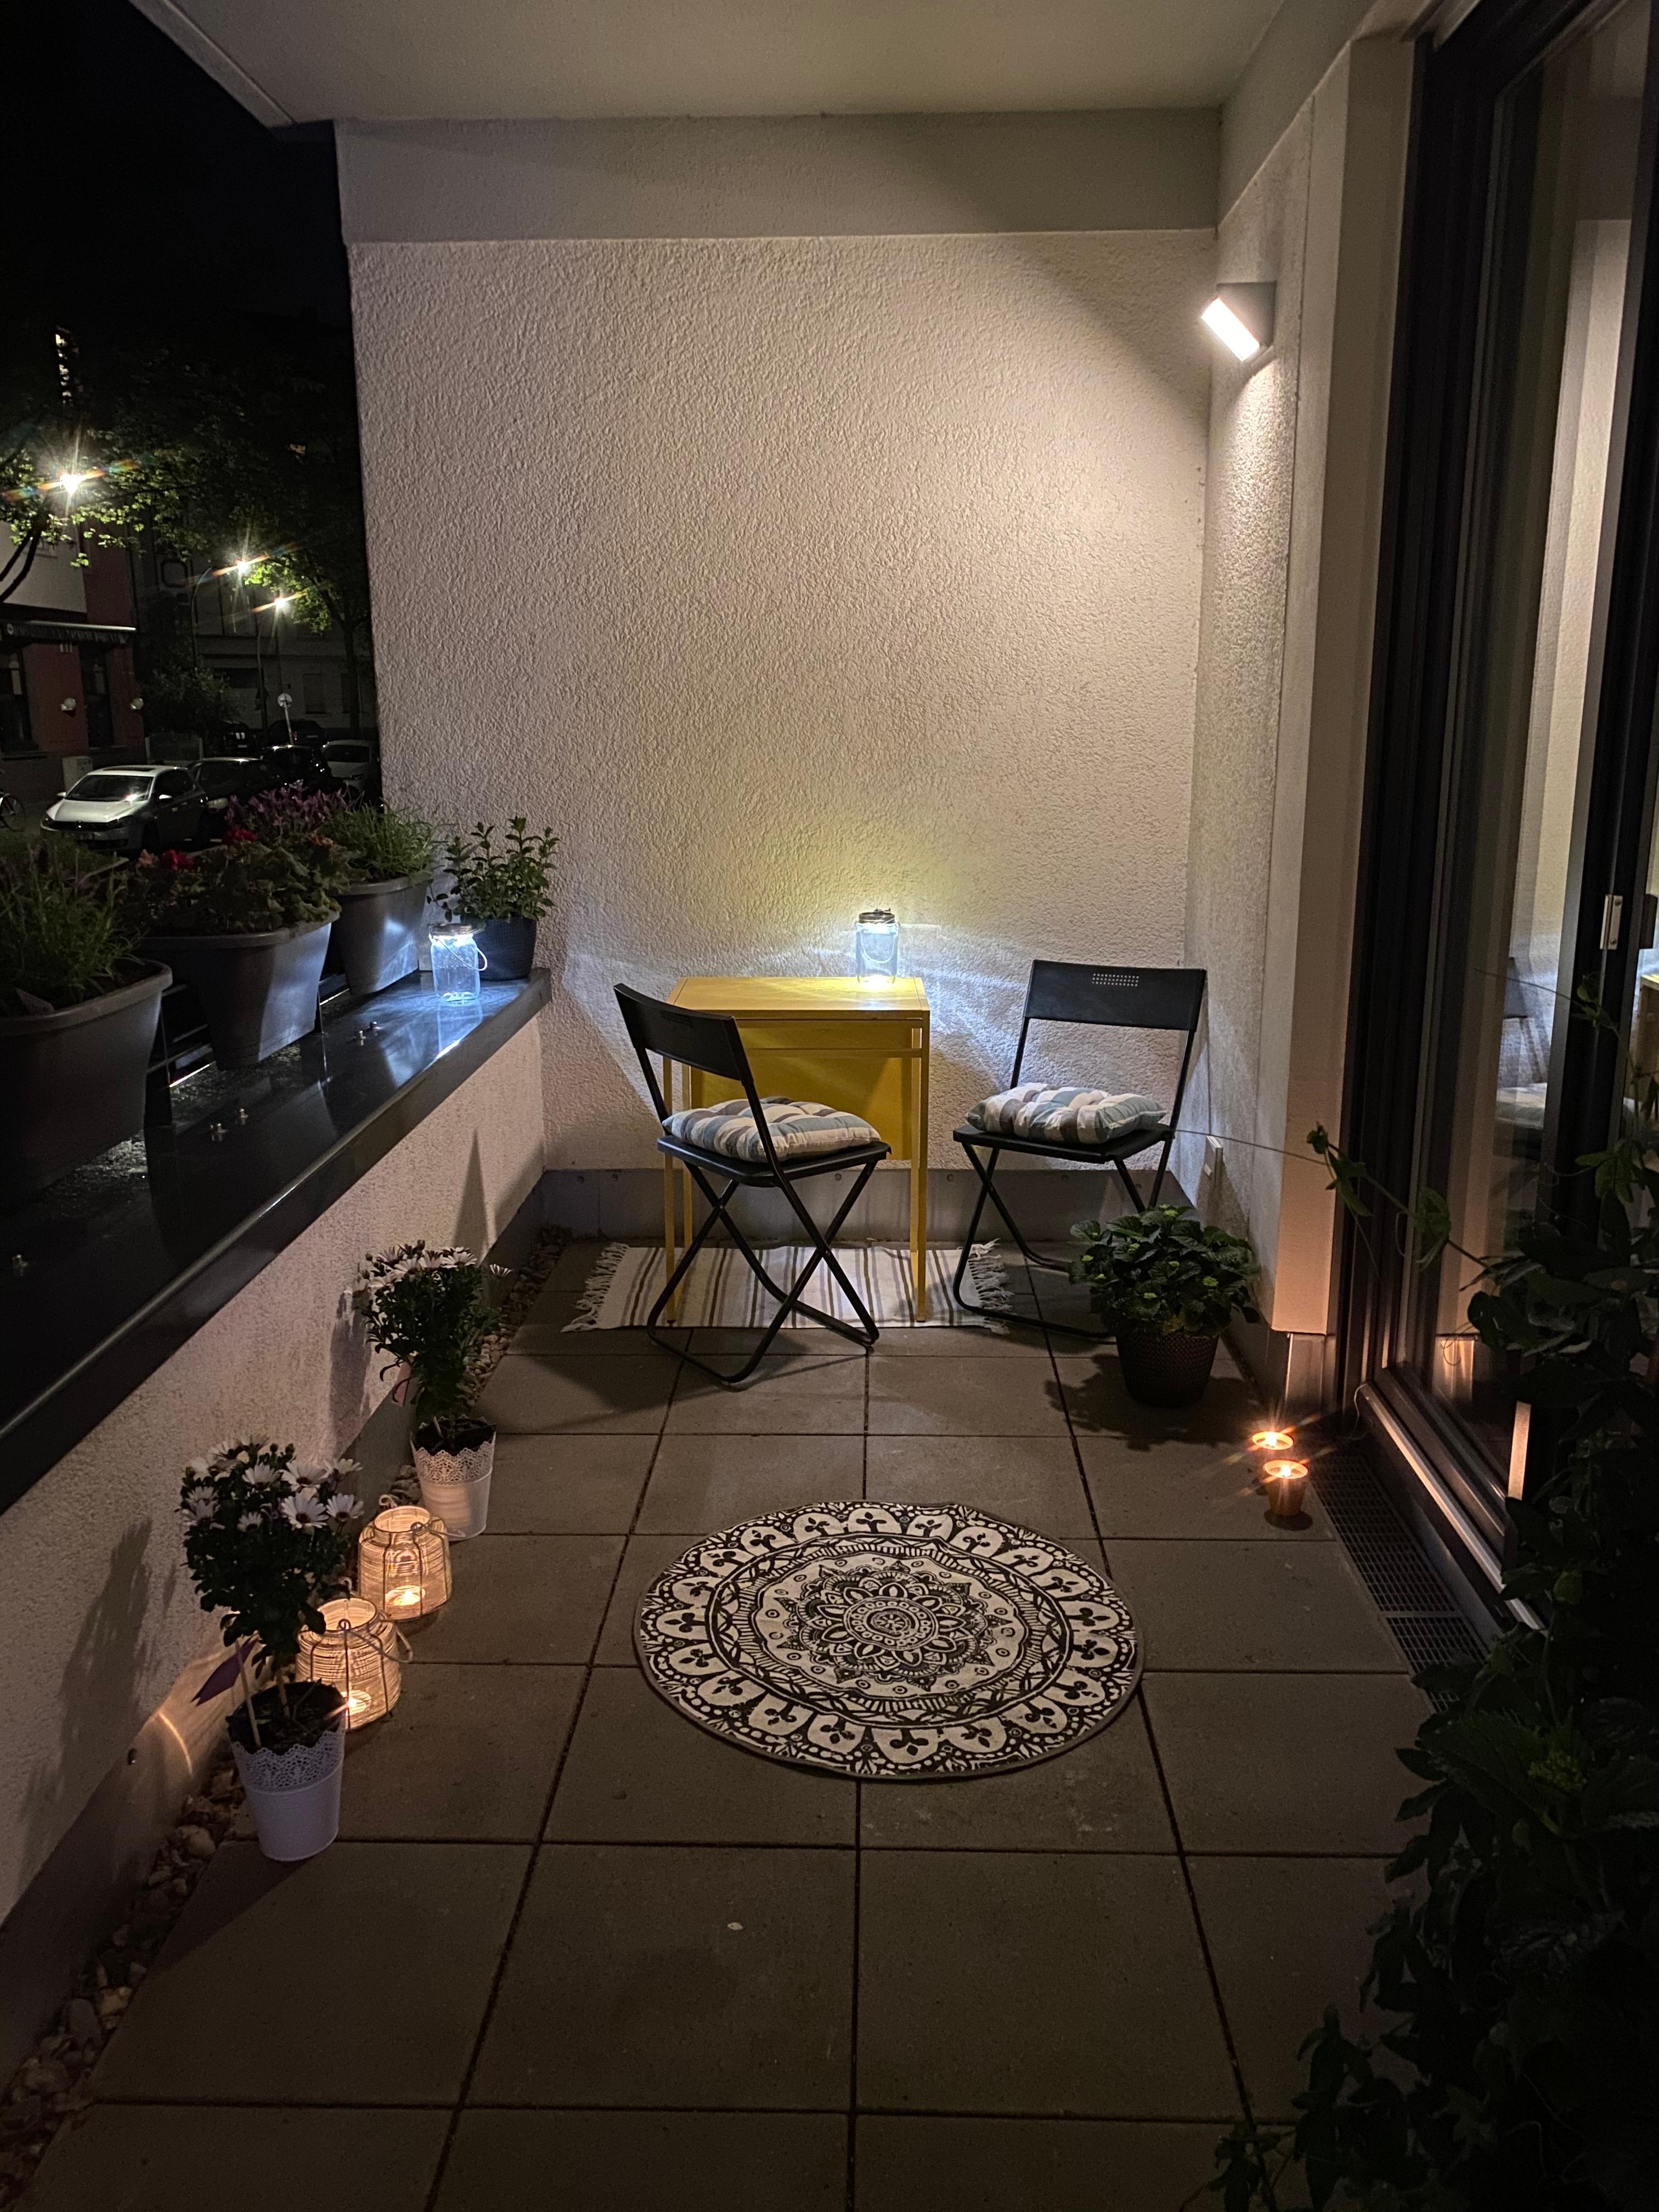 #stayathome #couchstyle #couchliebe #balkon